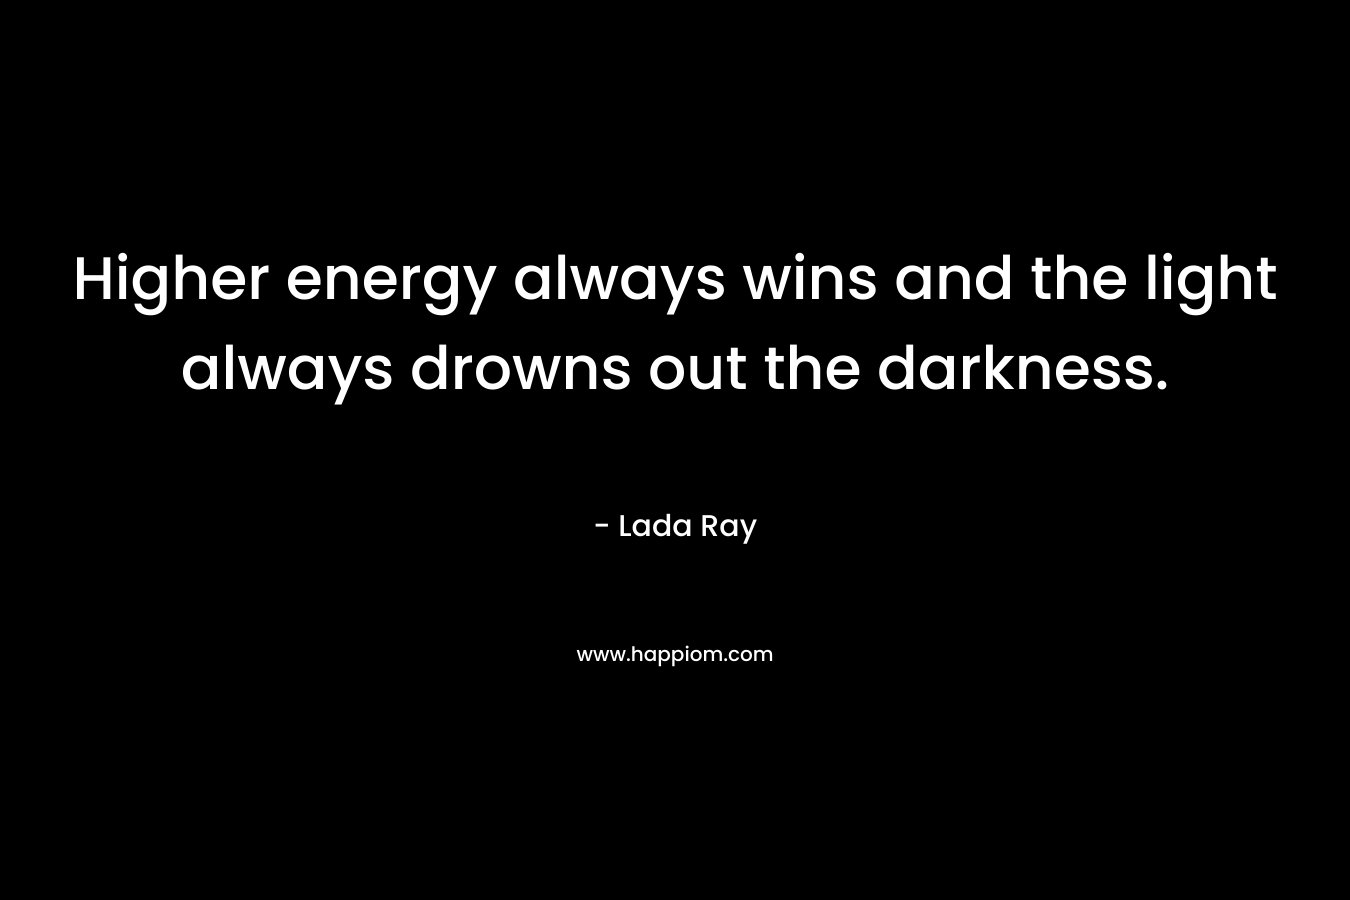 Higher energy always wins and the light always drowns out the darkness. – Lada Ray